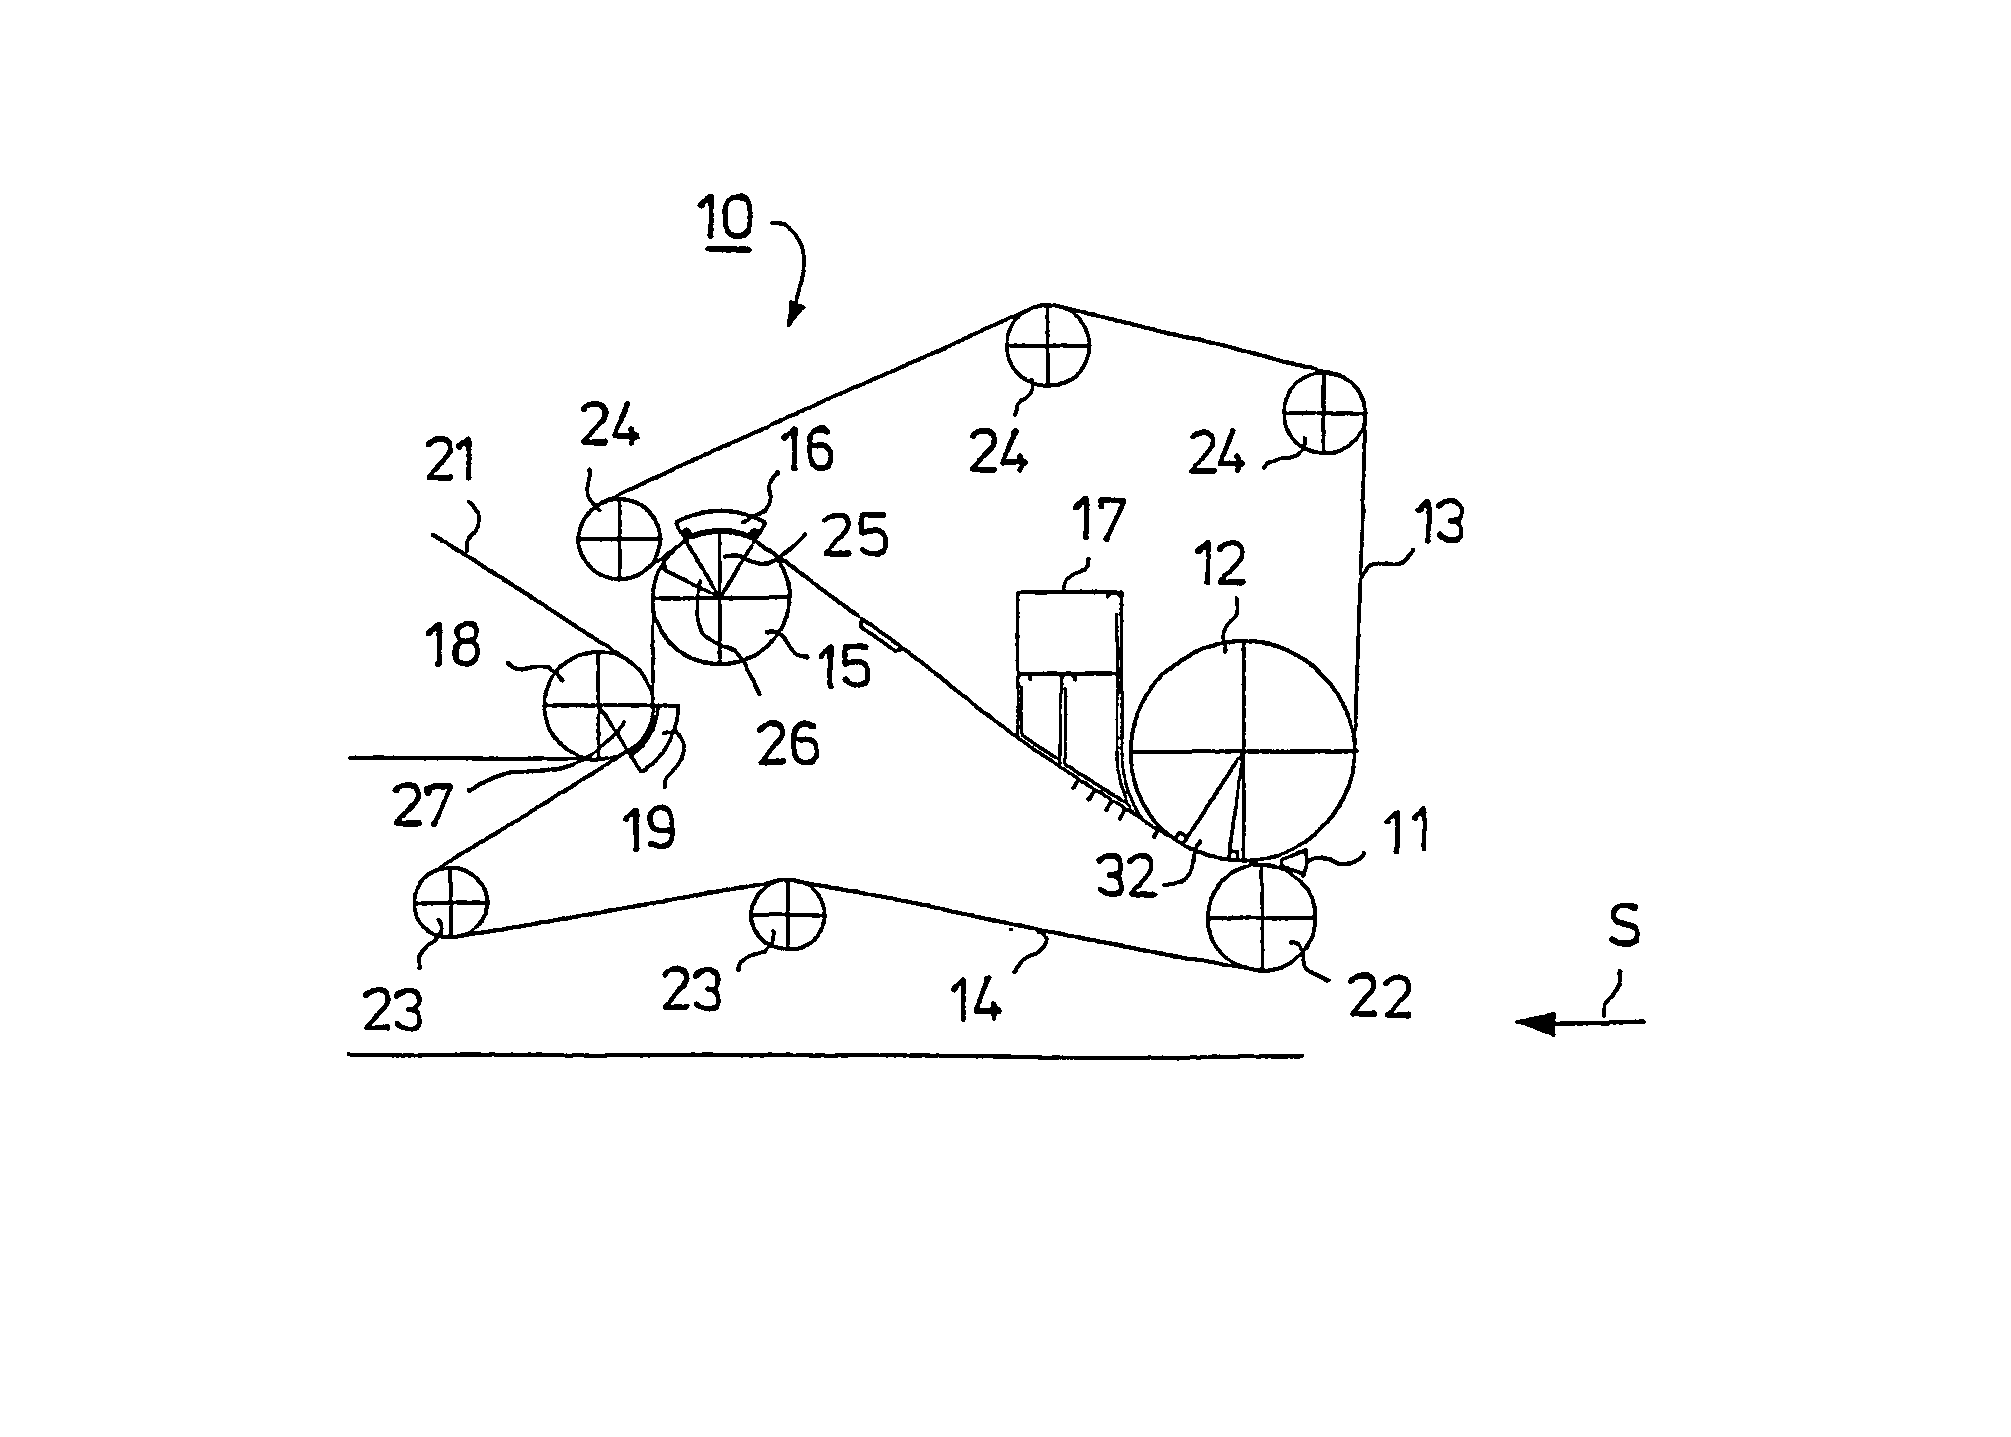 Arrangement for a wire section of a paper or board machine